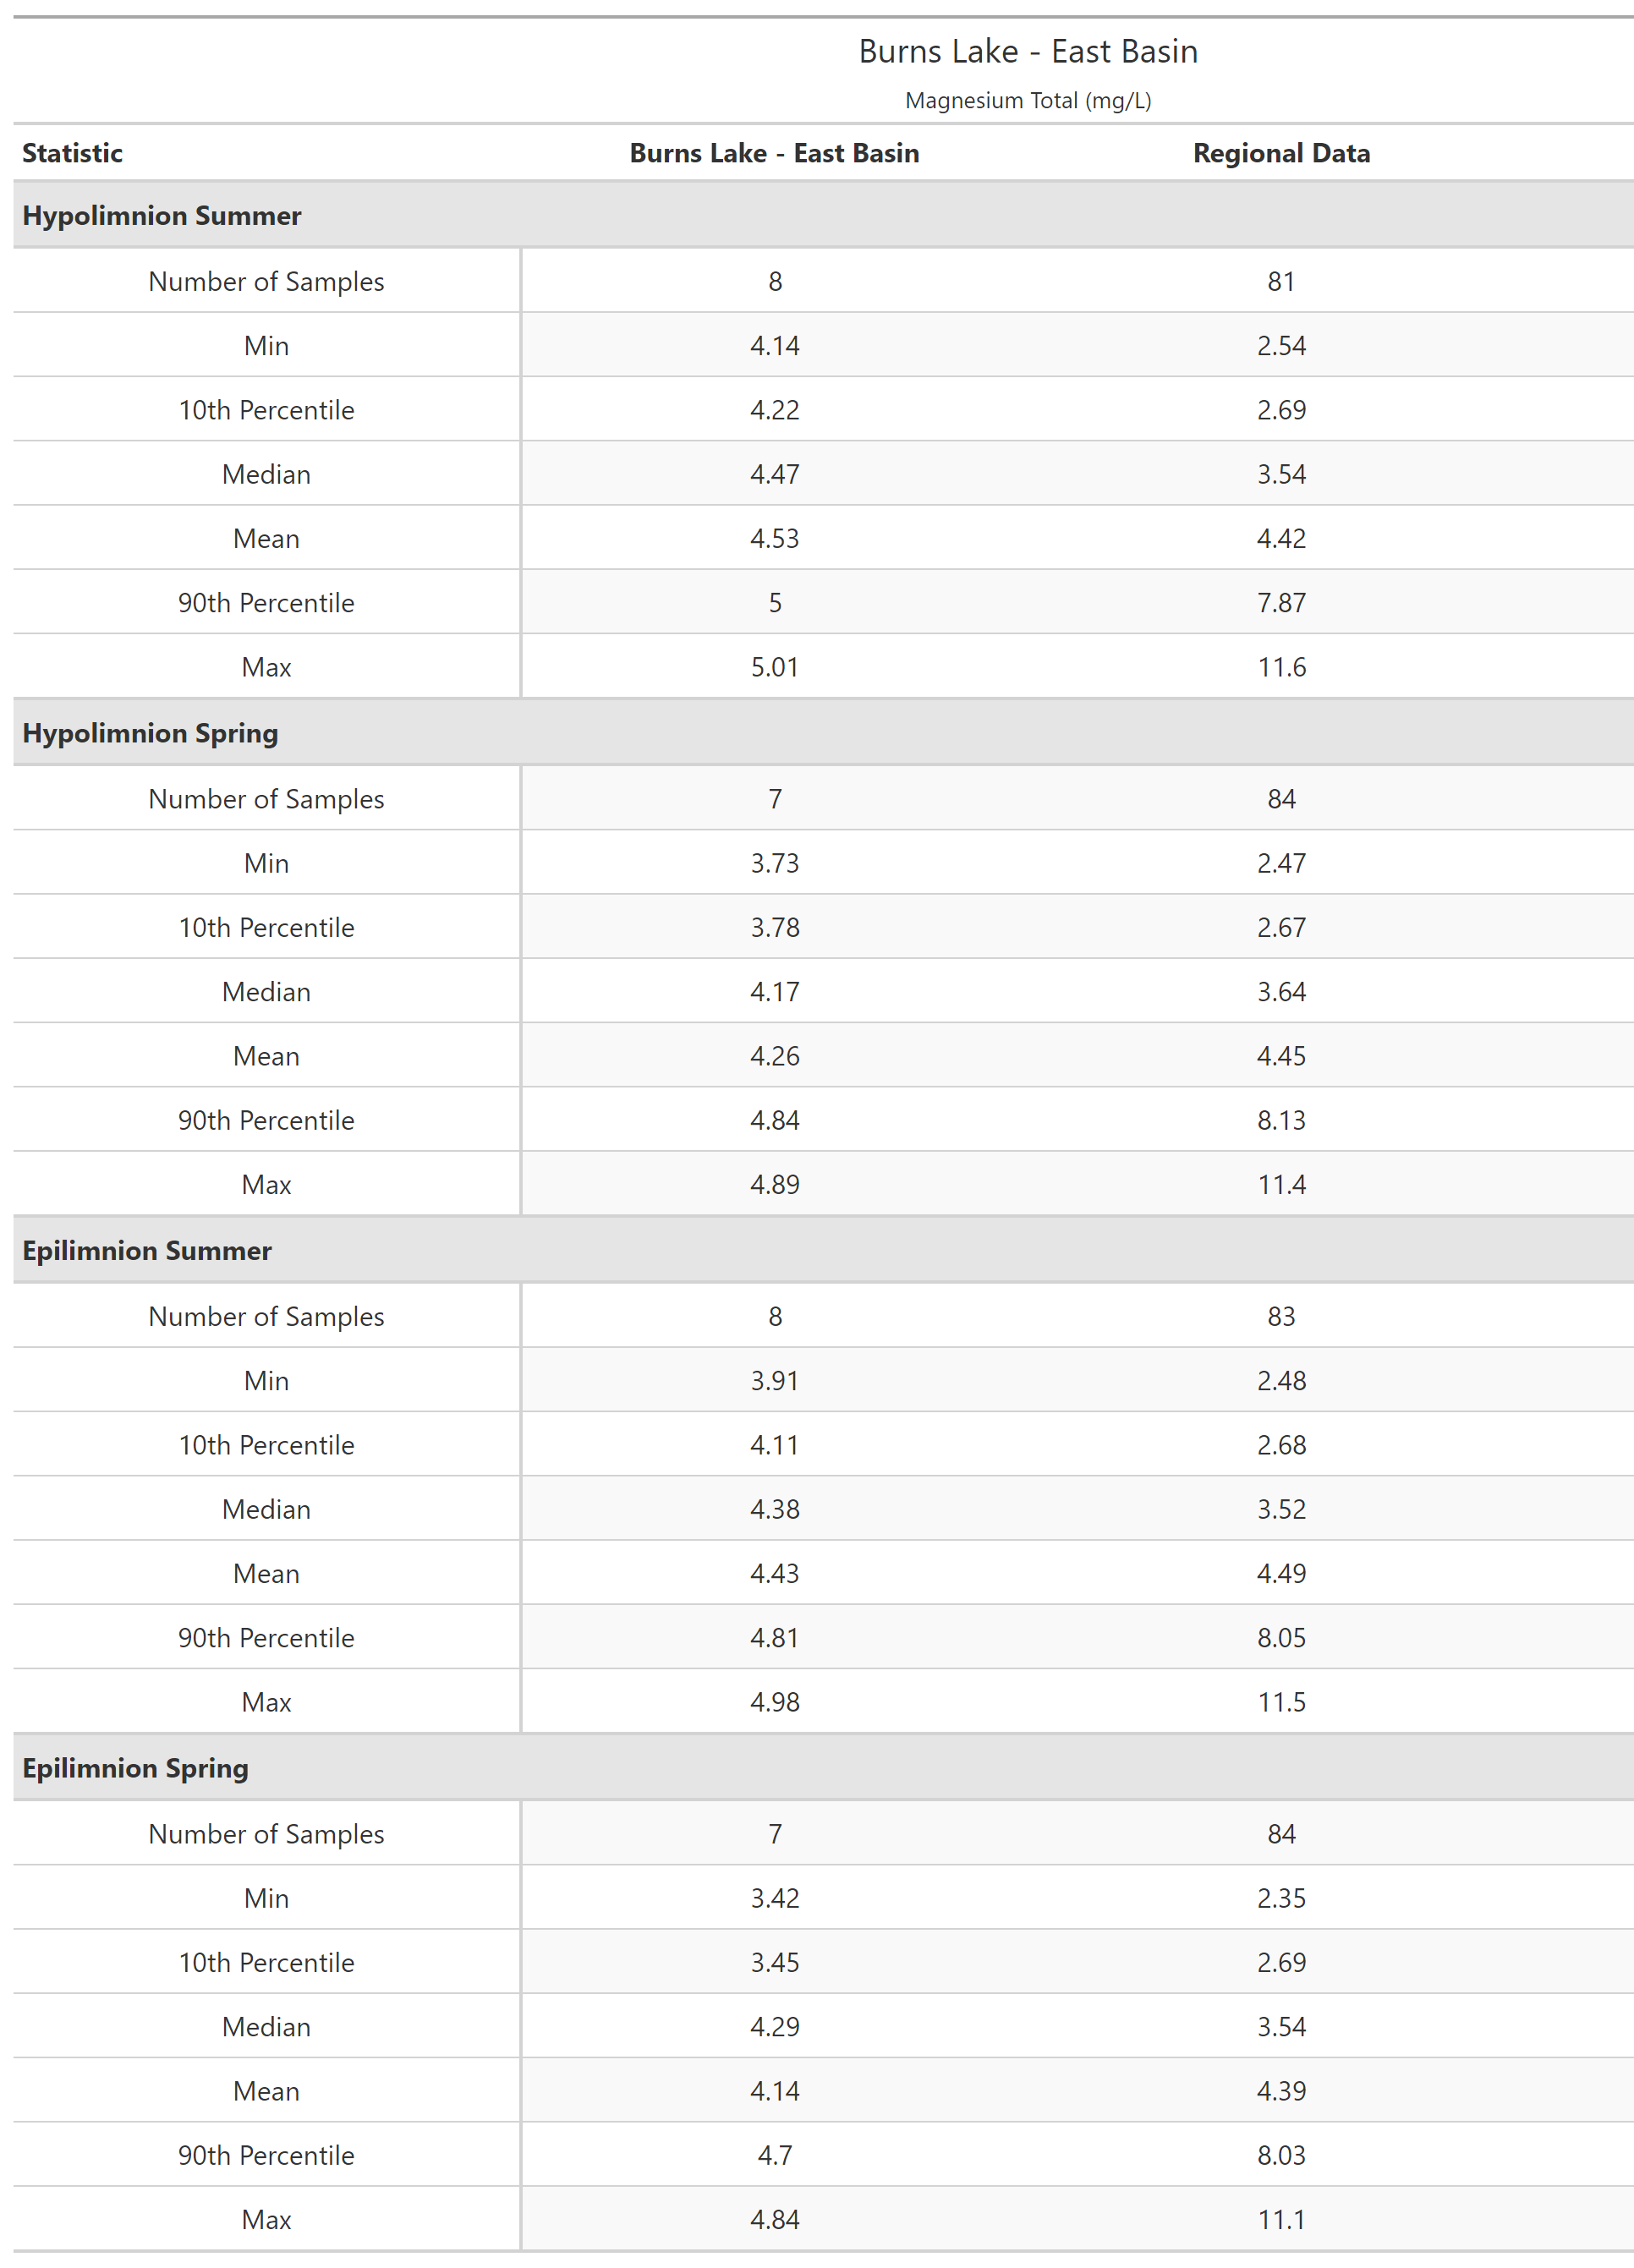 A table of summary statistics for Magnesium Total with comparison to regional data